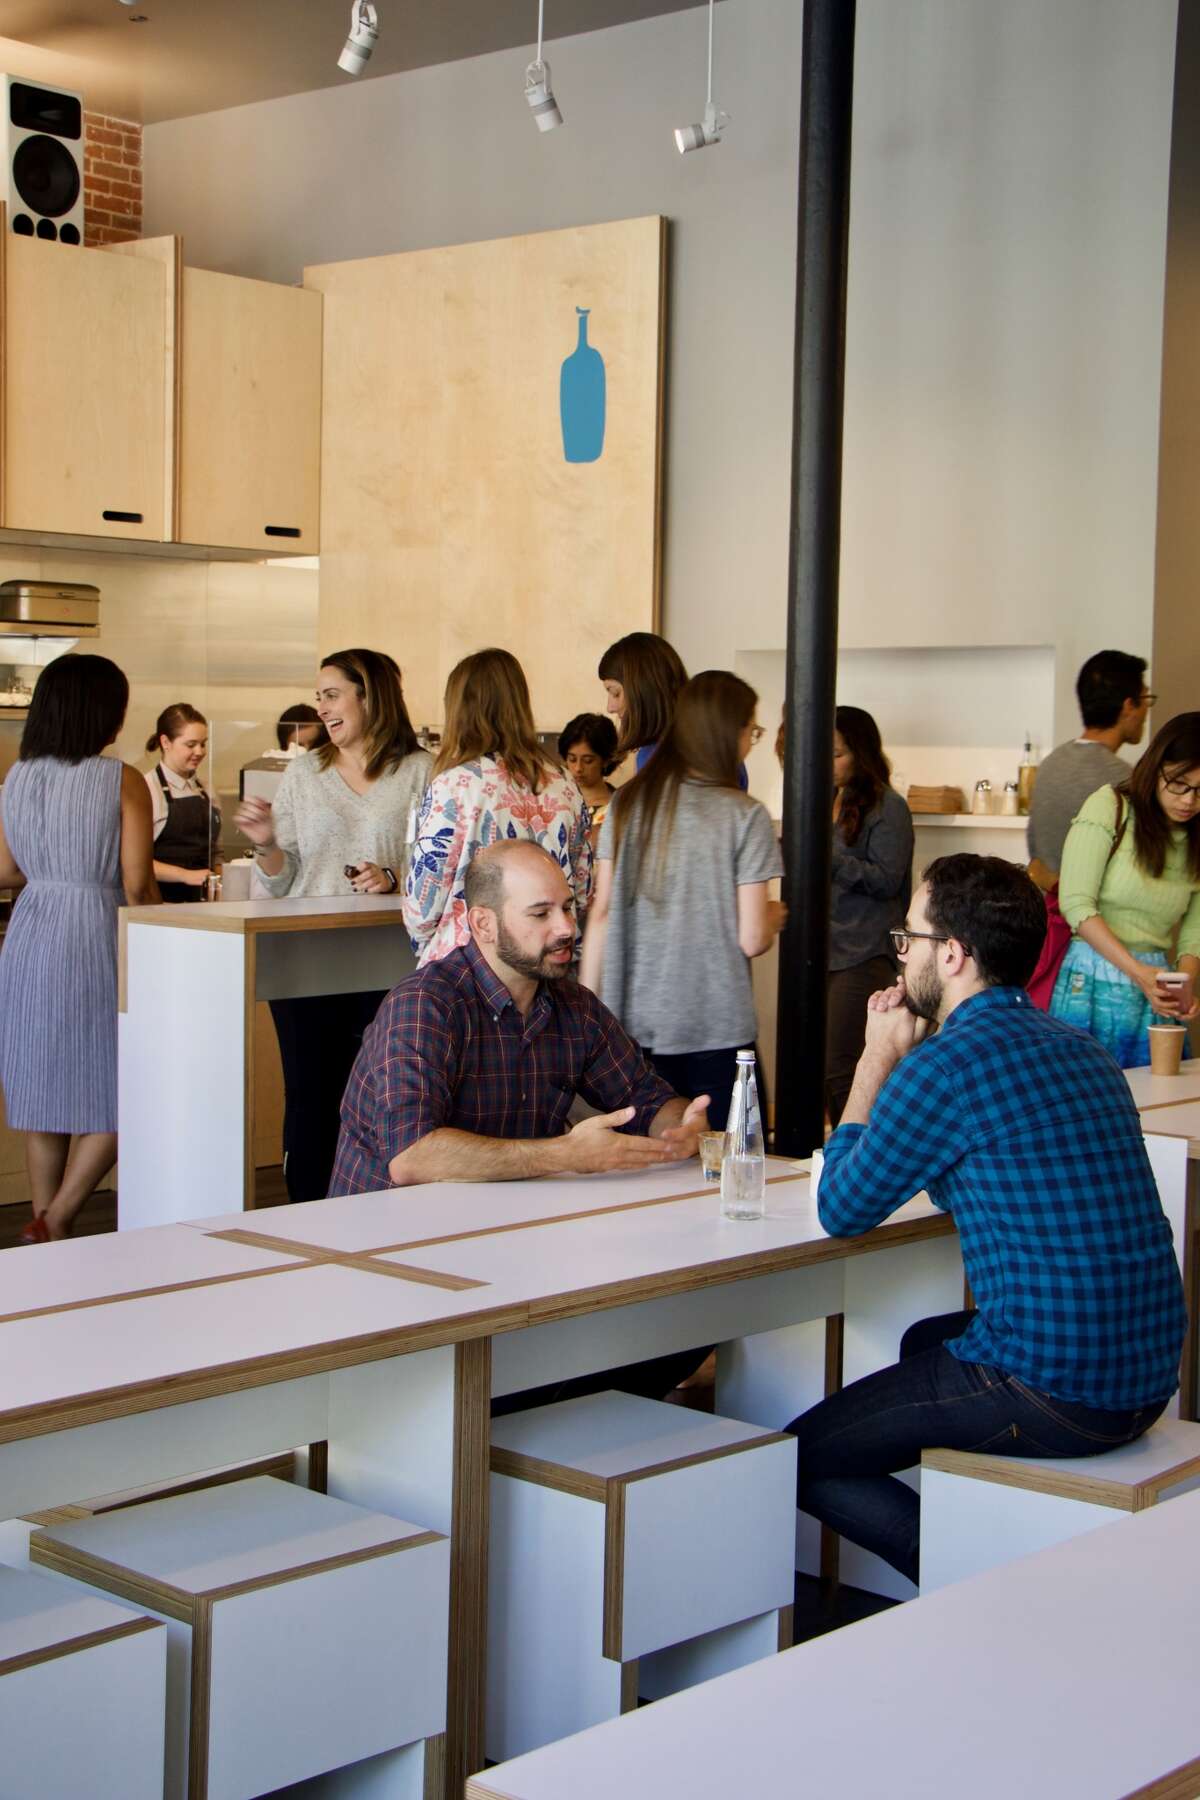 Blue Bottle's new cafe/training facility opens in Old Oakland on June 23 at 480 9th St. Photo via Blue Bottle.